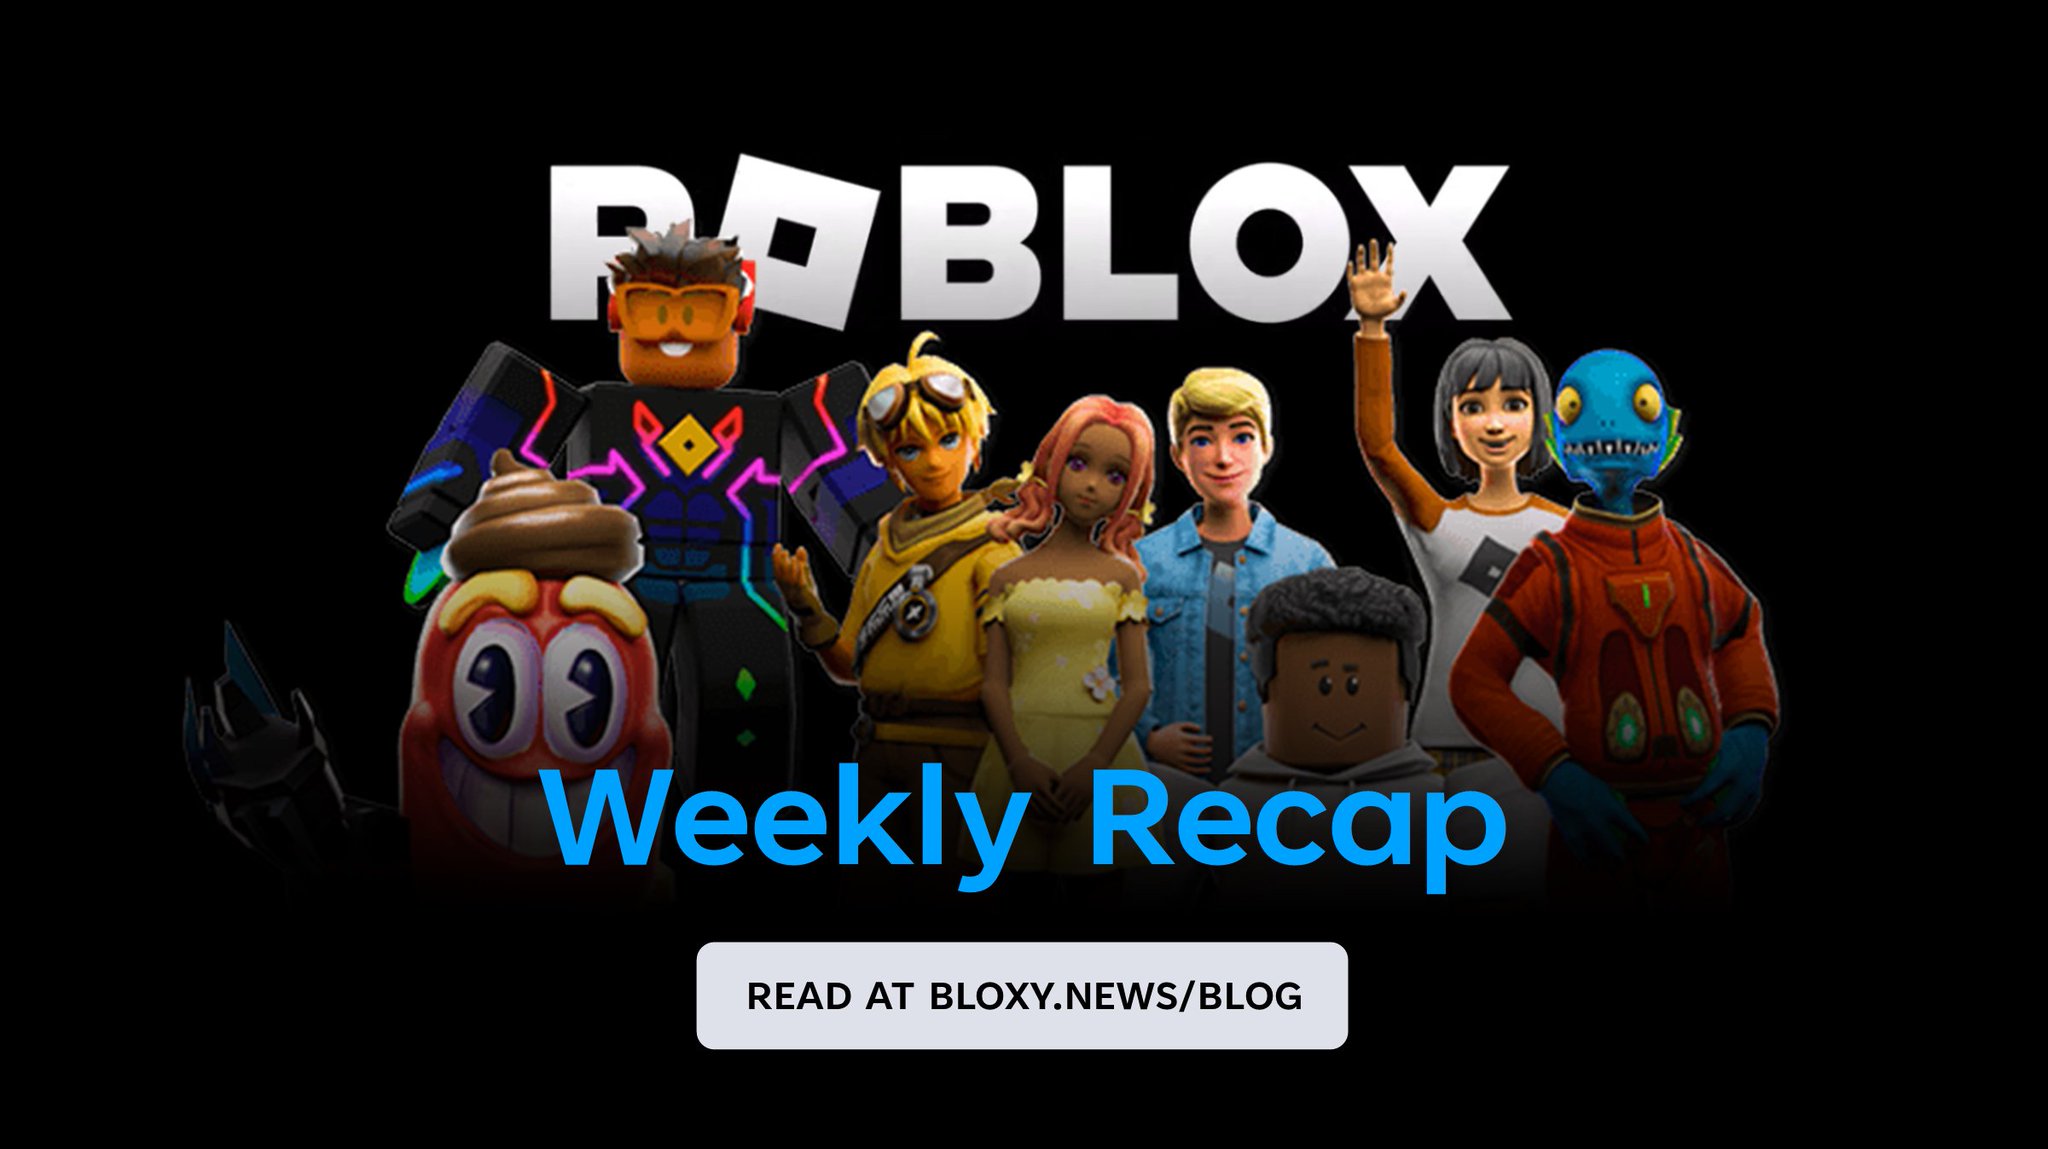 Bloxy News on X: So apparently #Roblox is turning into Twitter